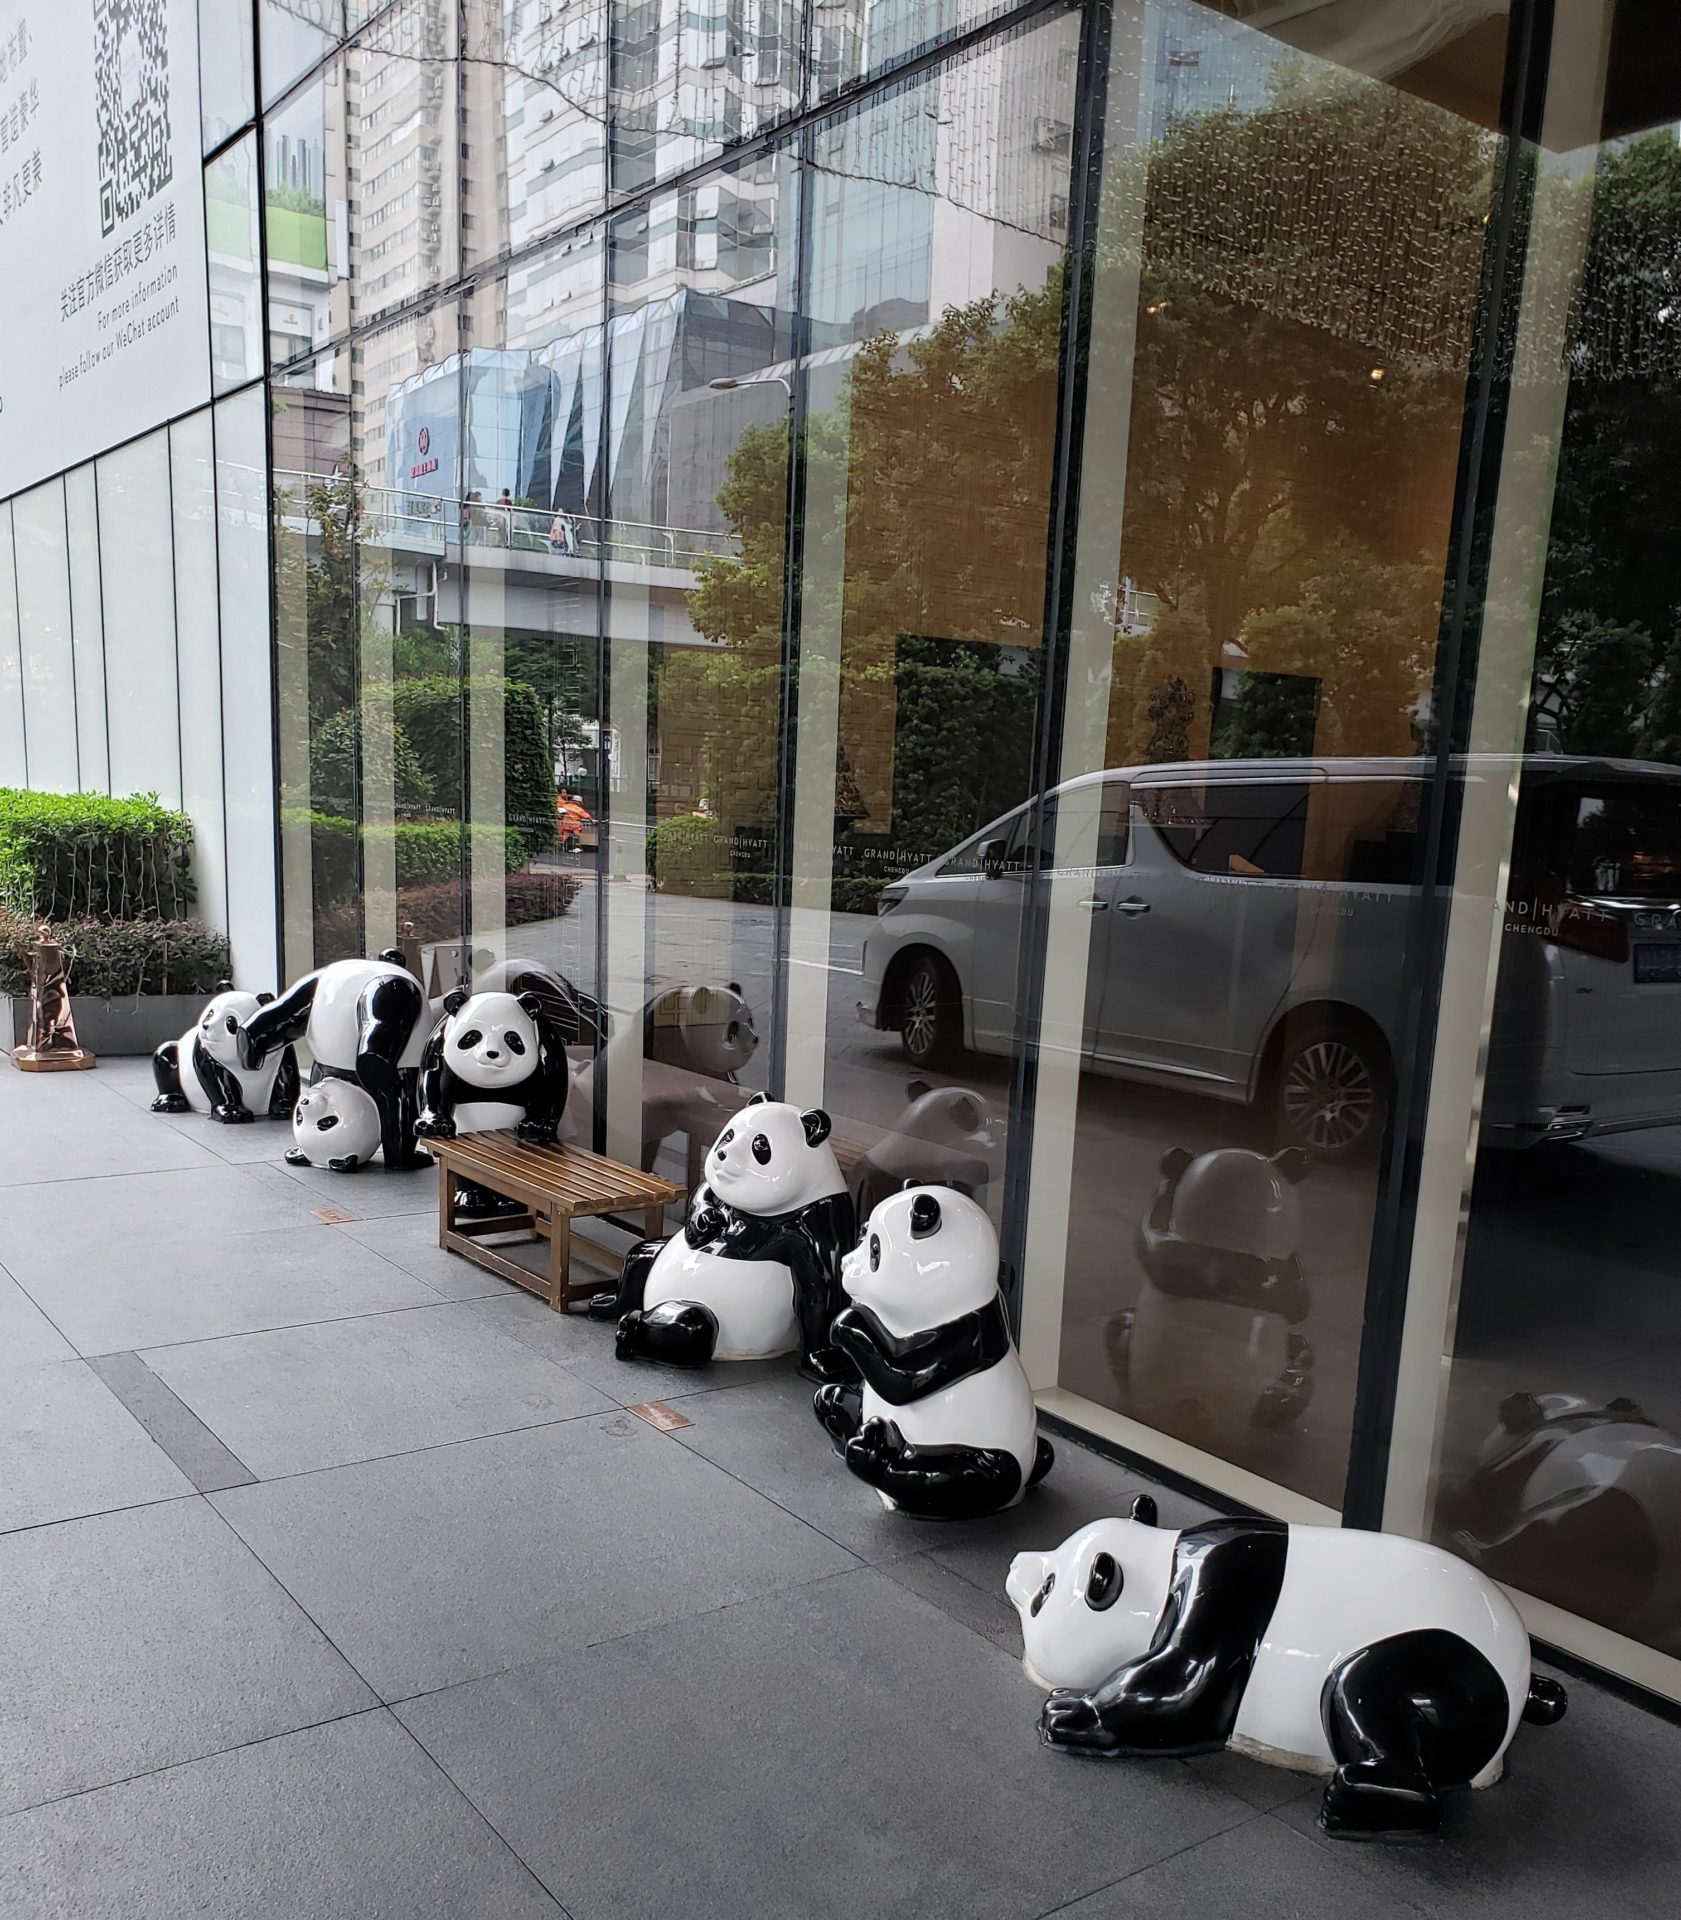 a group of panda statues outside a building